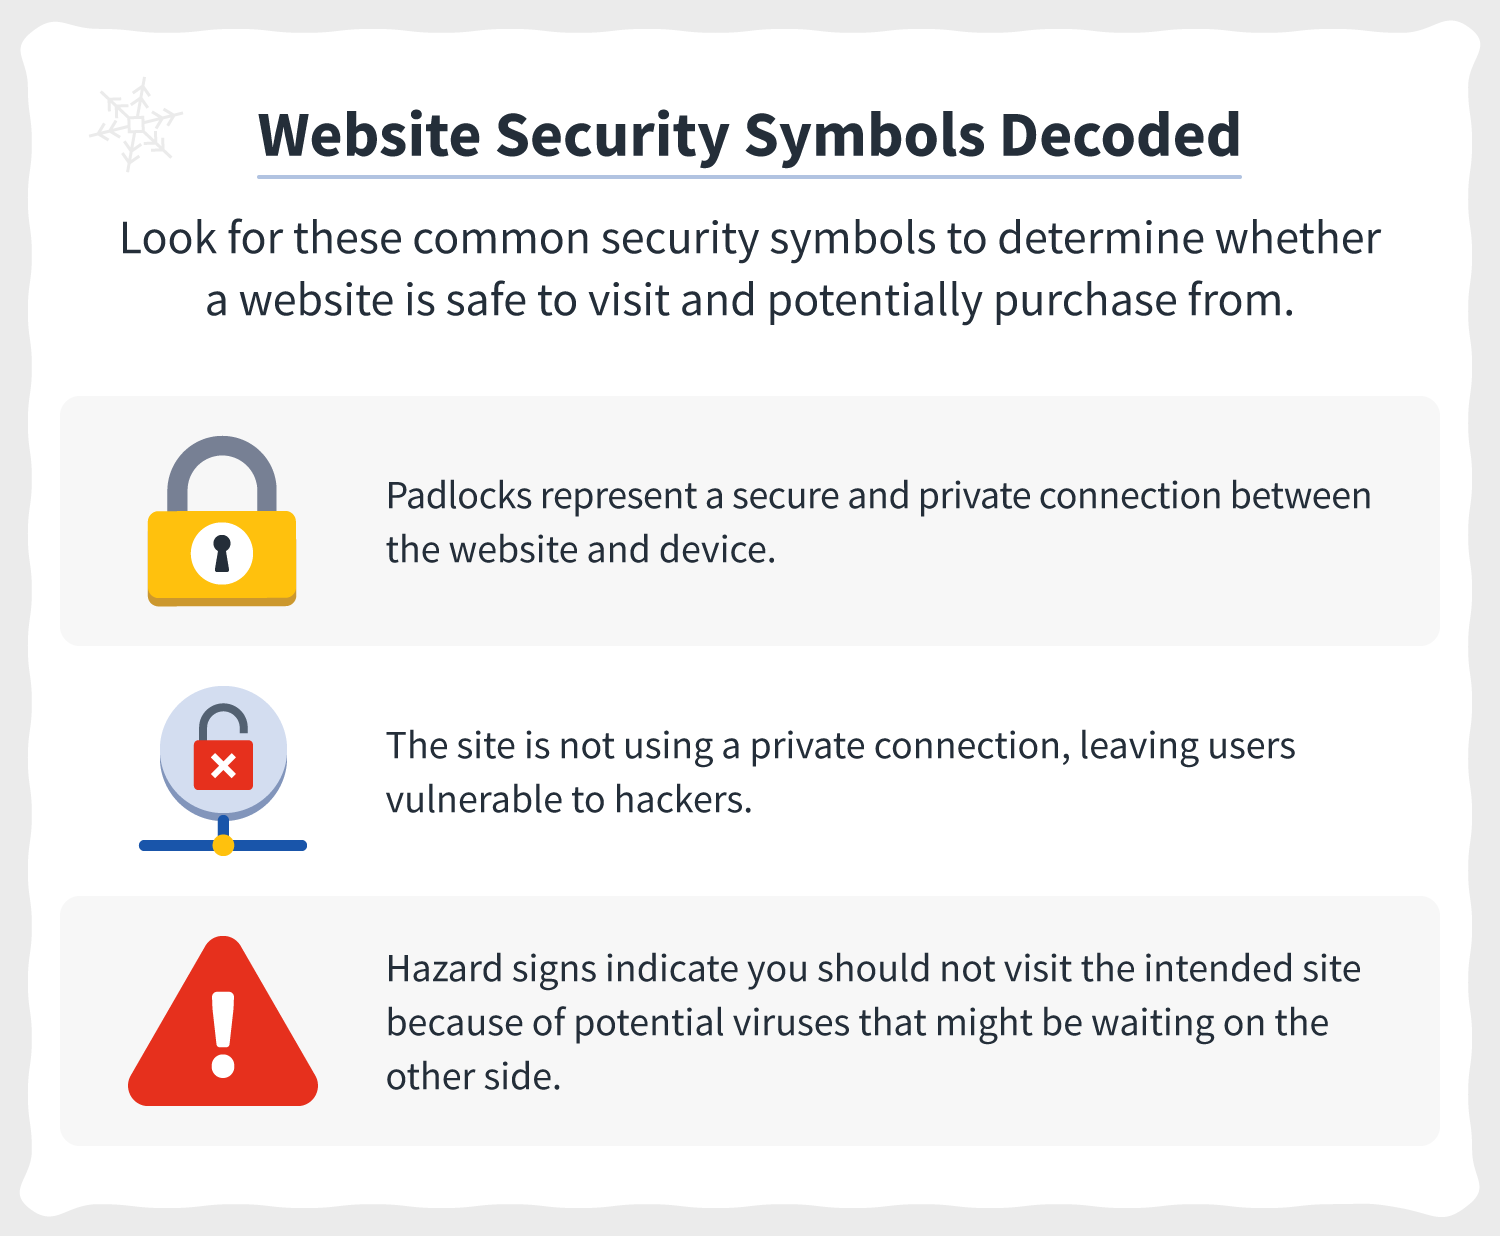 A locked padlock, unlocked padlock, and hazard symbol indicate common security symbols that can help determine how to know if a website is safe. 